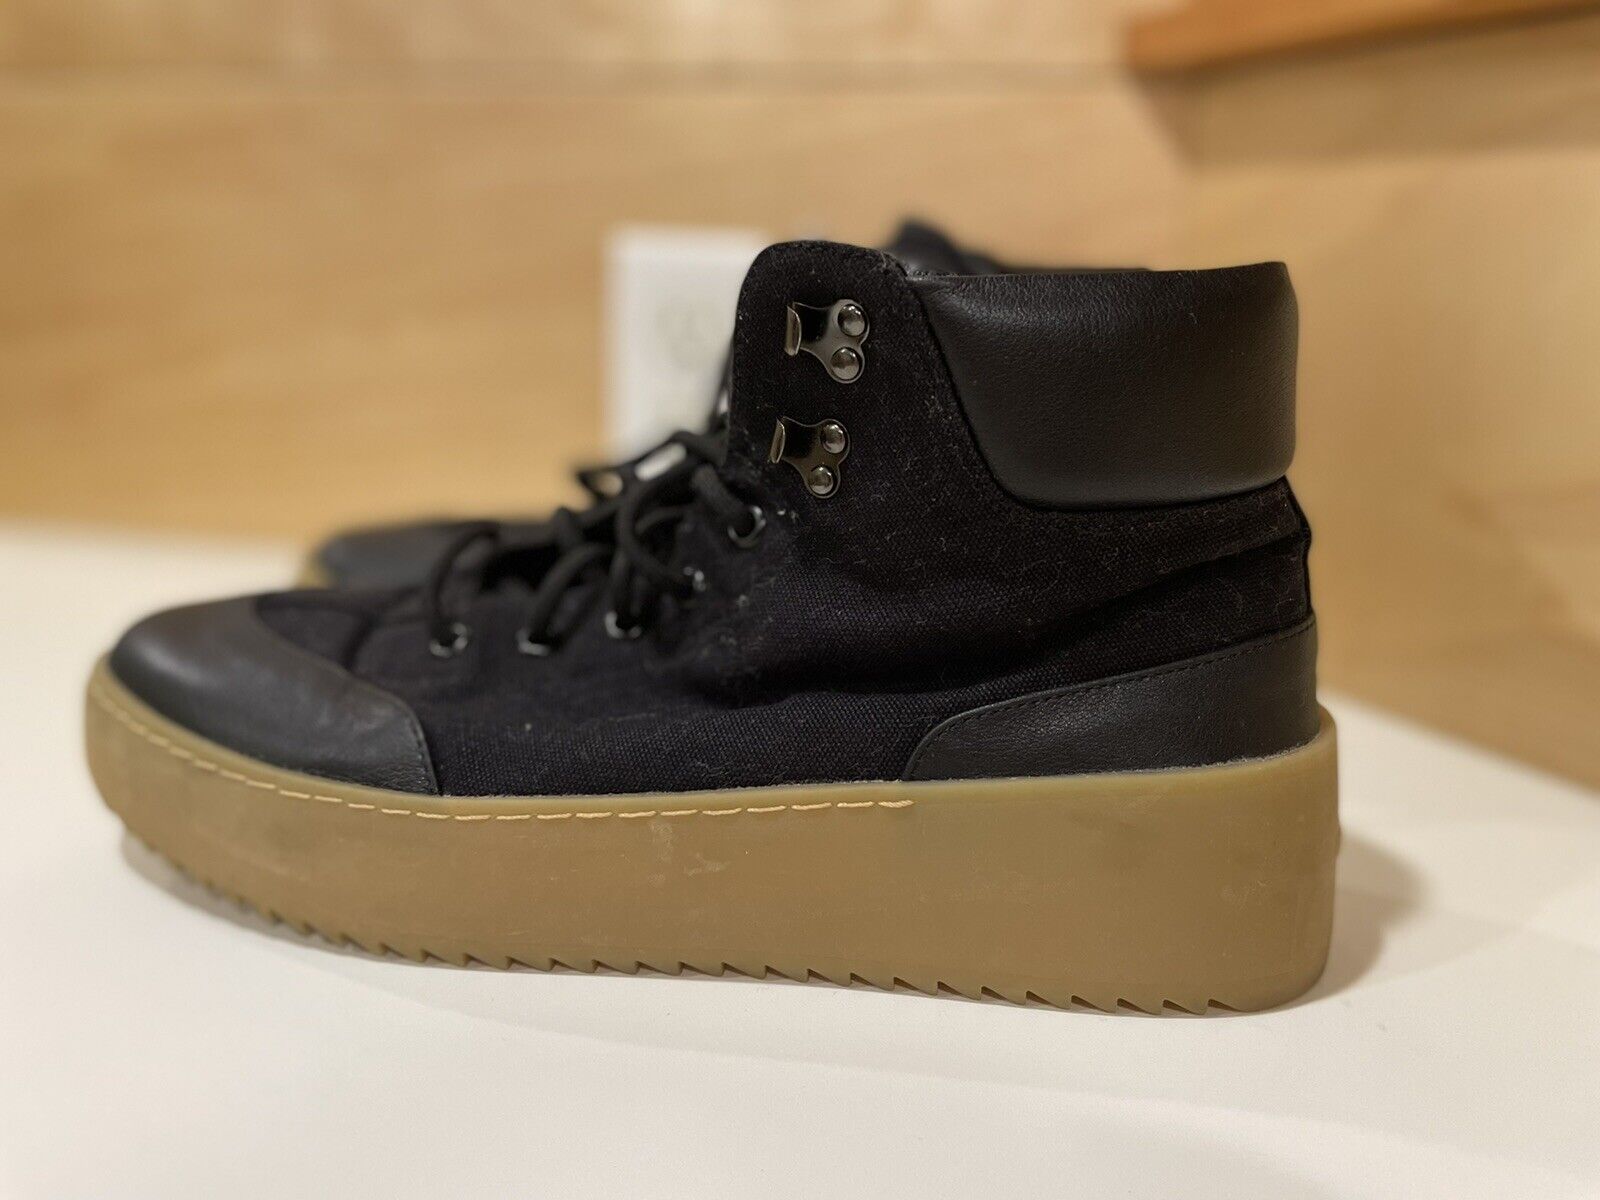 FEAR OF GOD Black/gum Sole Hiking High-Top Sneaker boots Shoes SZ 9.5/42 RARE